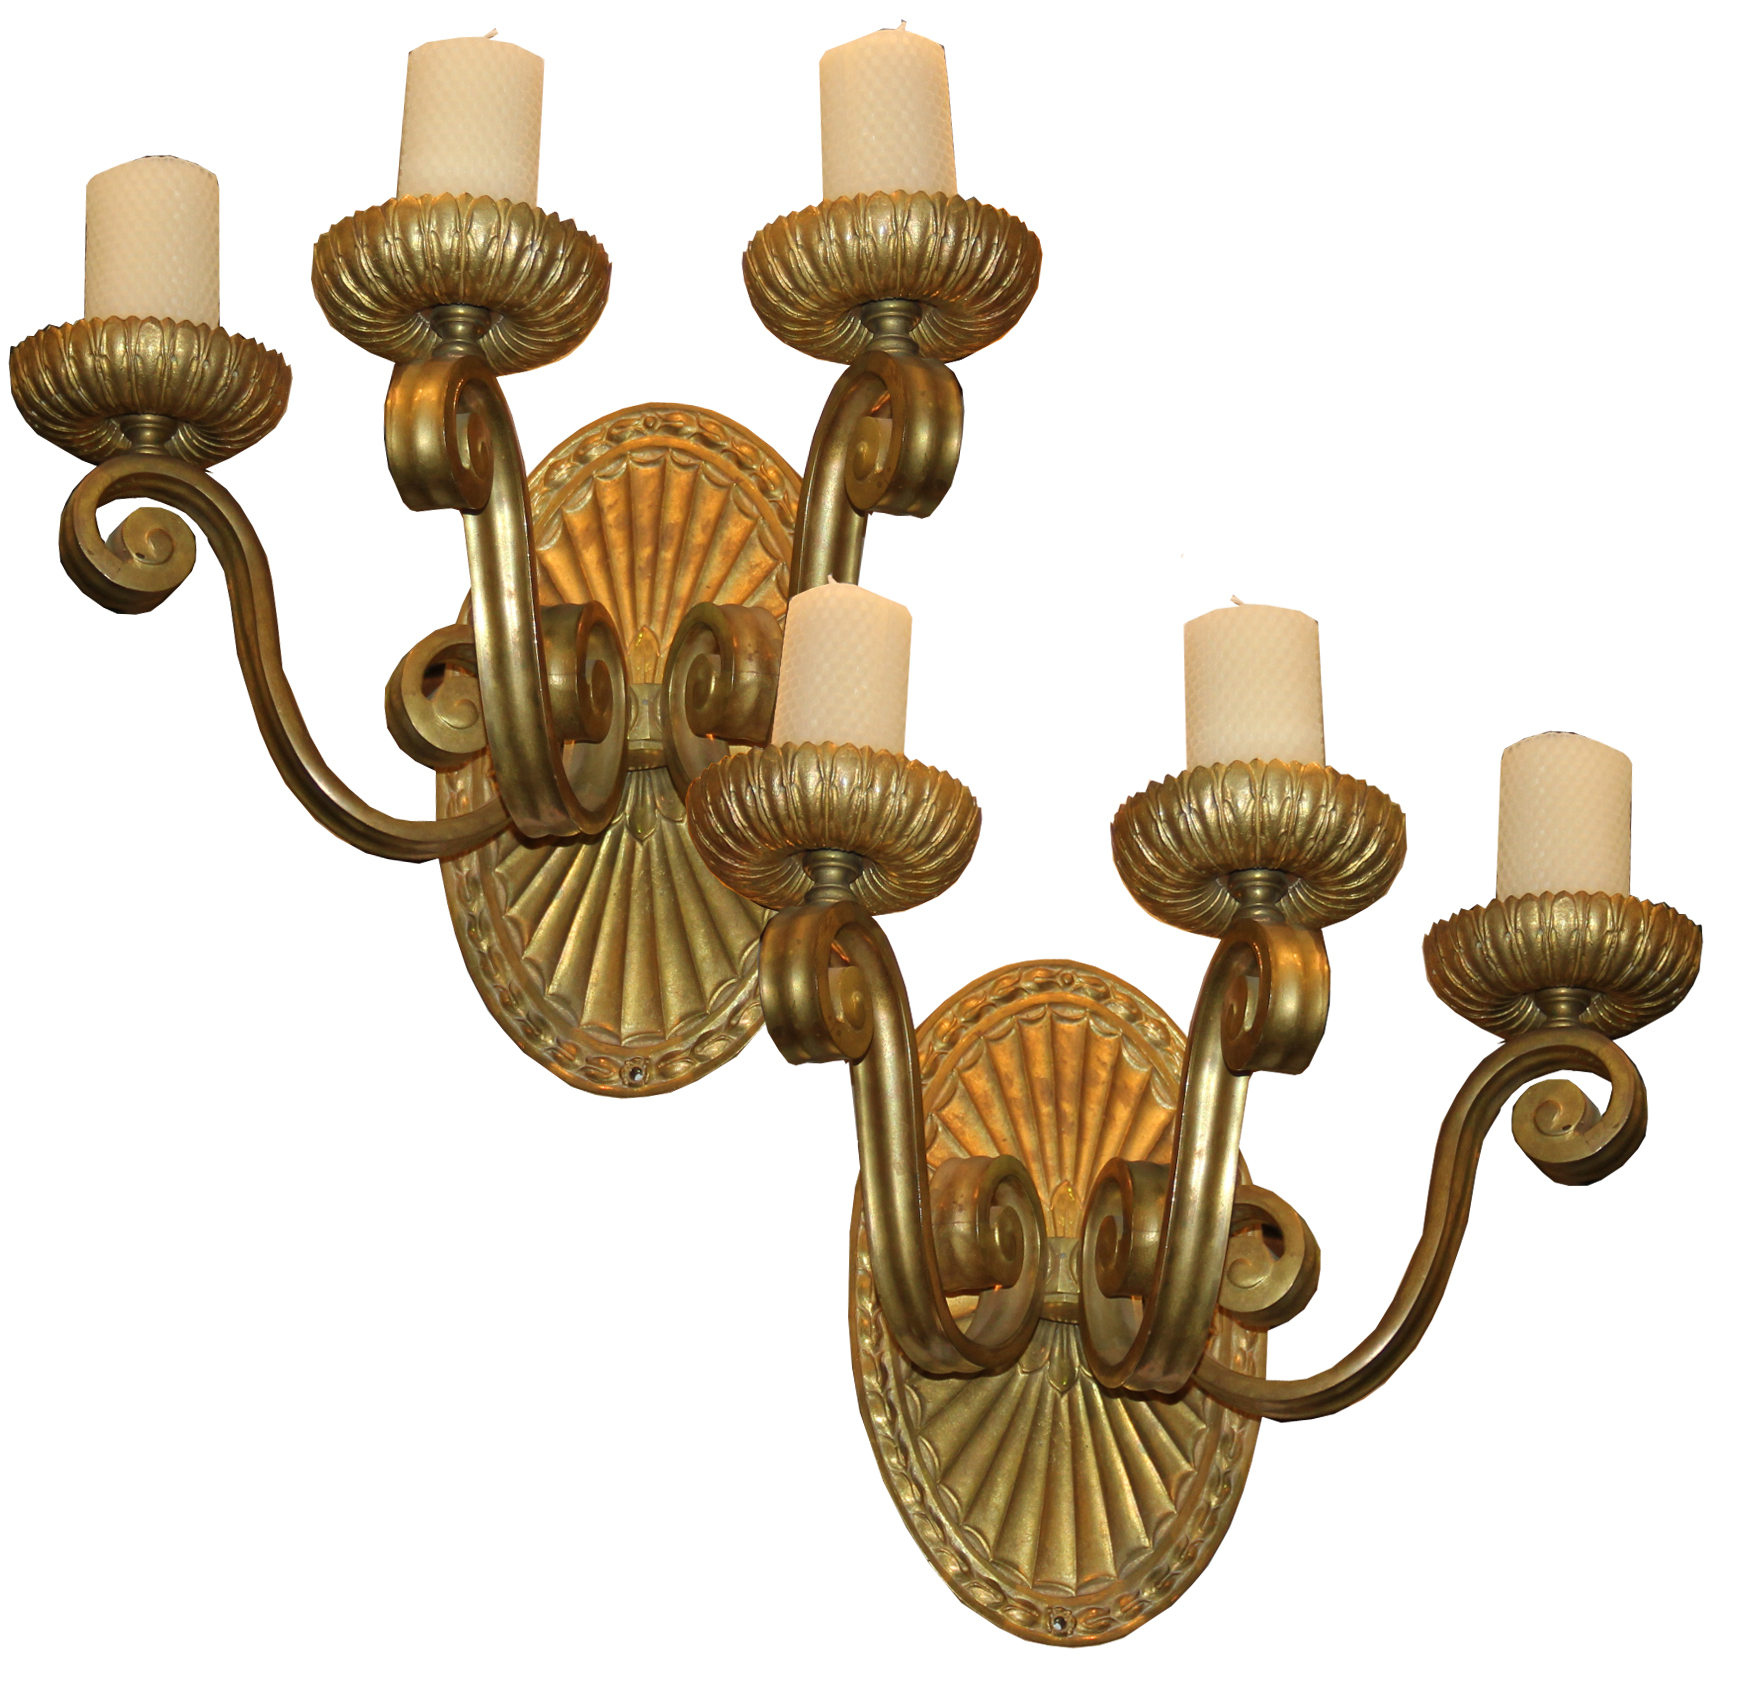 A Pair of 19th Century Italian Brass Wall Sconces No. 4458